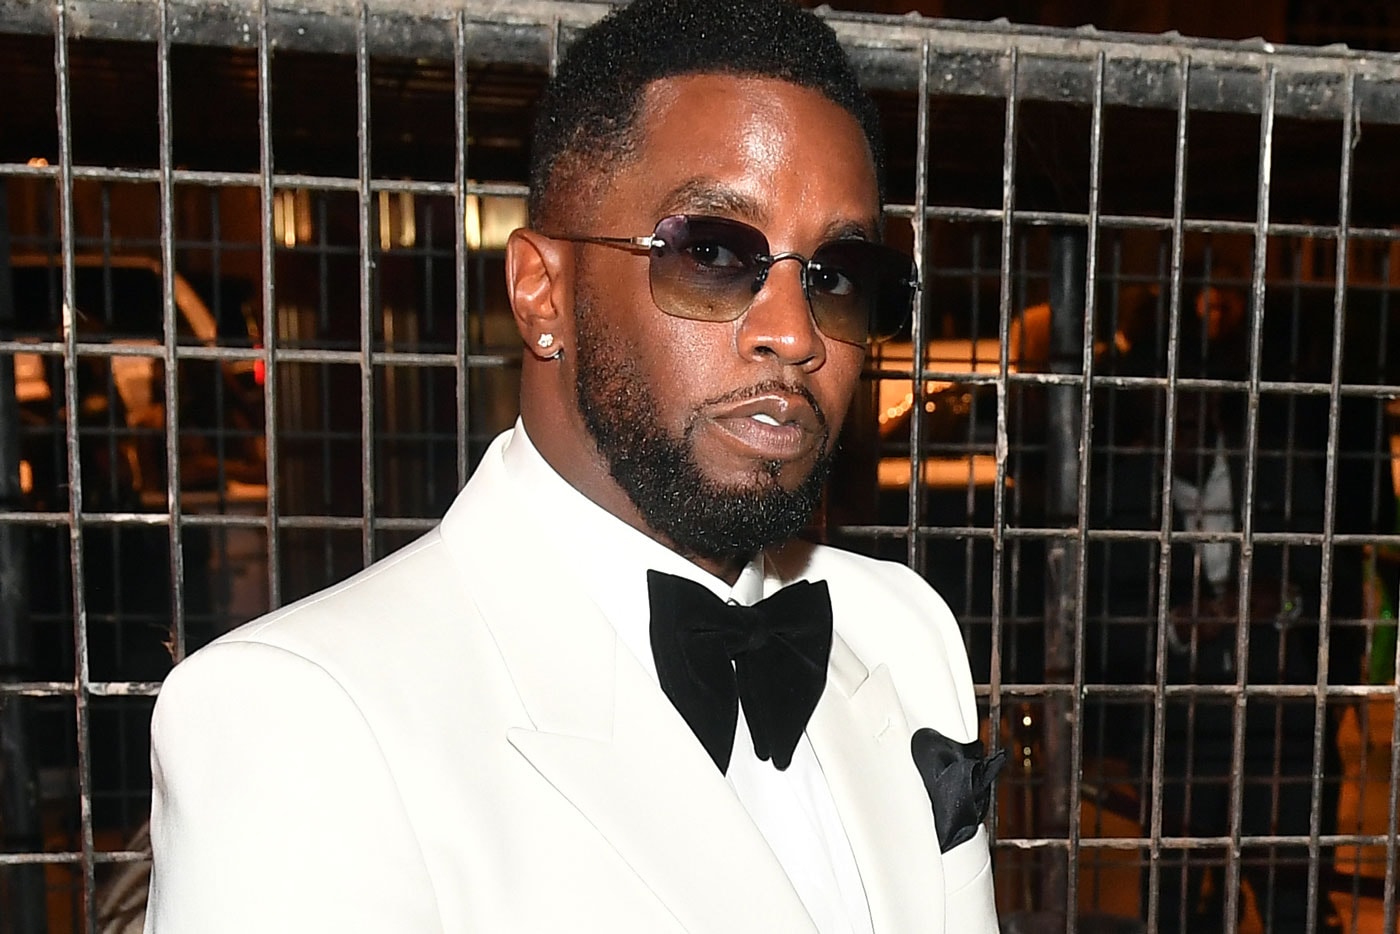 Puff Daddy Leads Forbes' List of 'Hip Hop Kings' For 2016